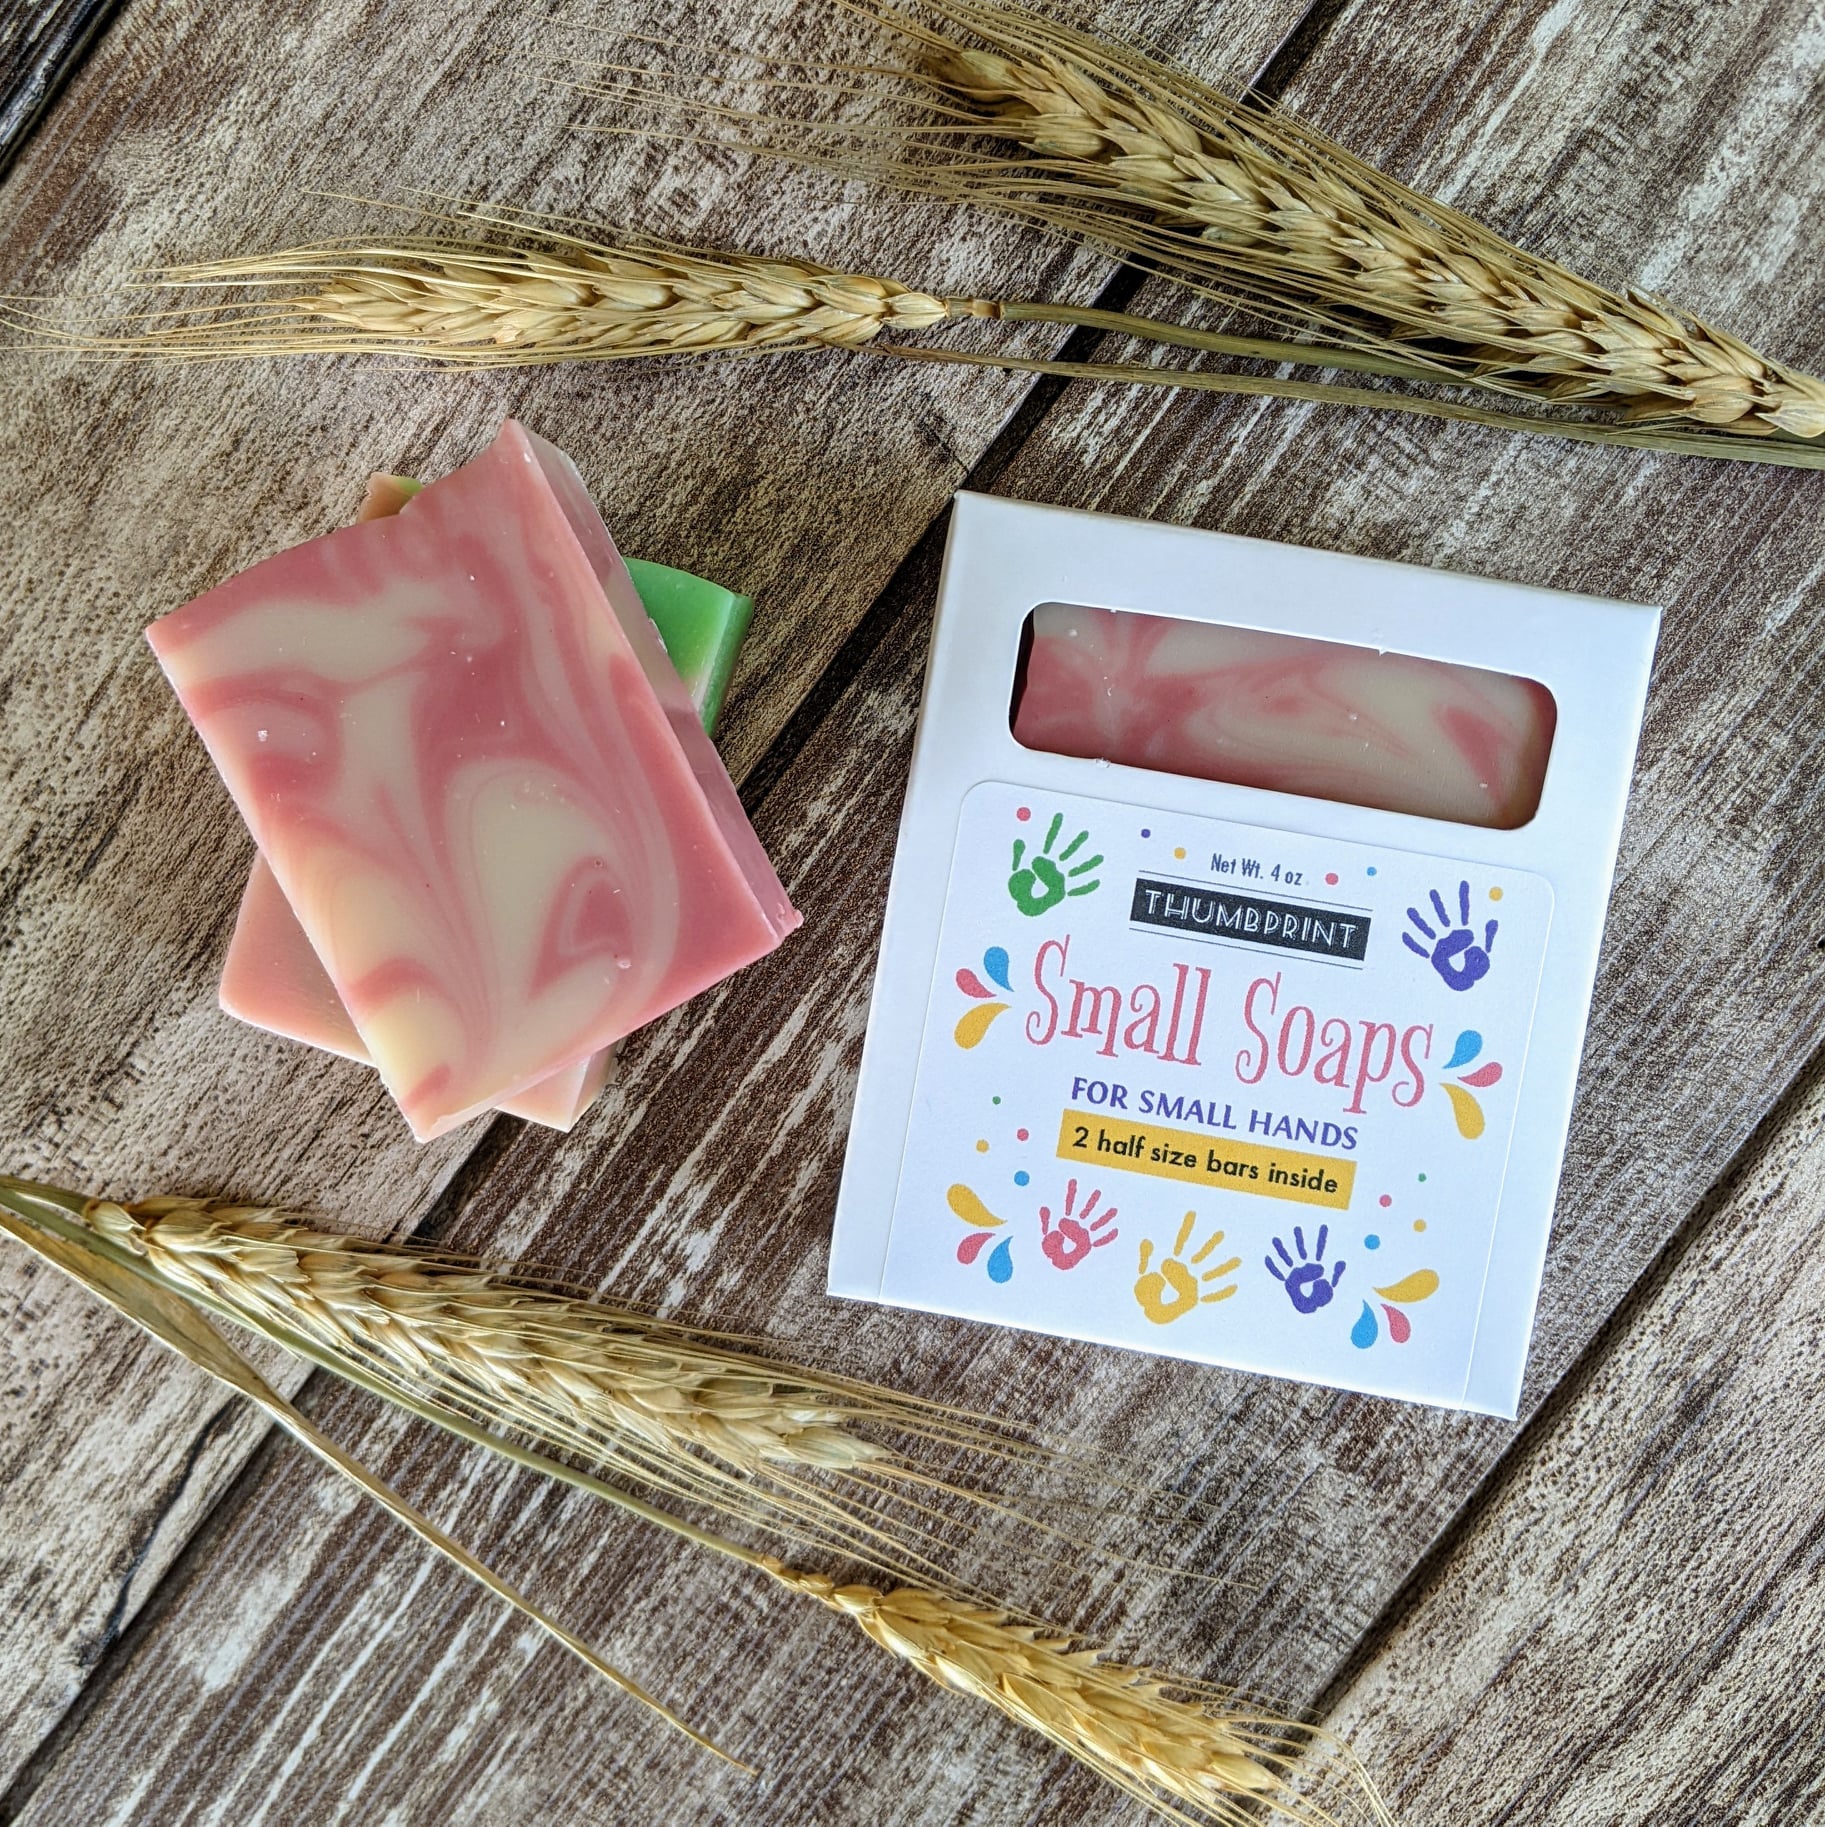 Small Soaps For Small Hands - Fruit Punch & Watermelon Taffy scents